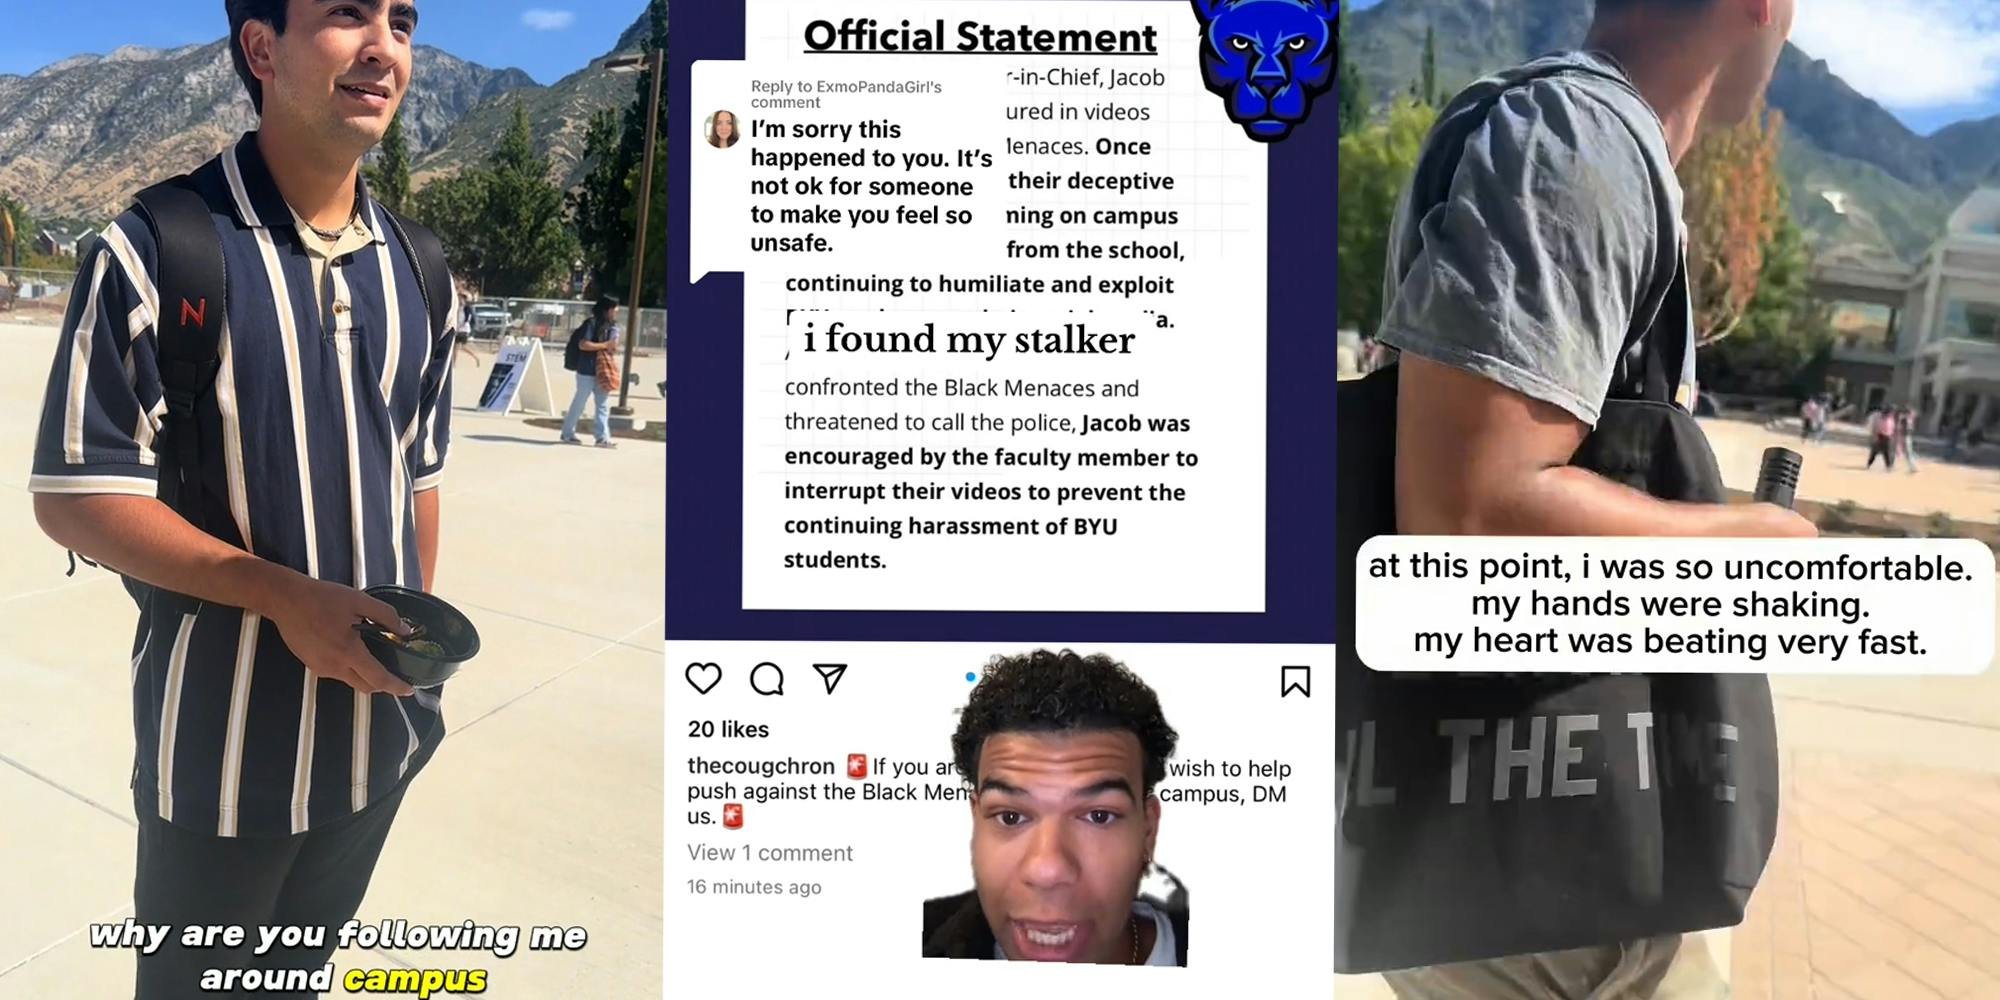 'I feel so completely unsafe': Black BYU student followed around on campus by peer and faculty